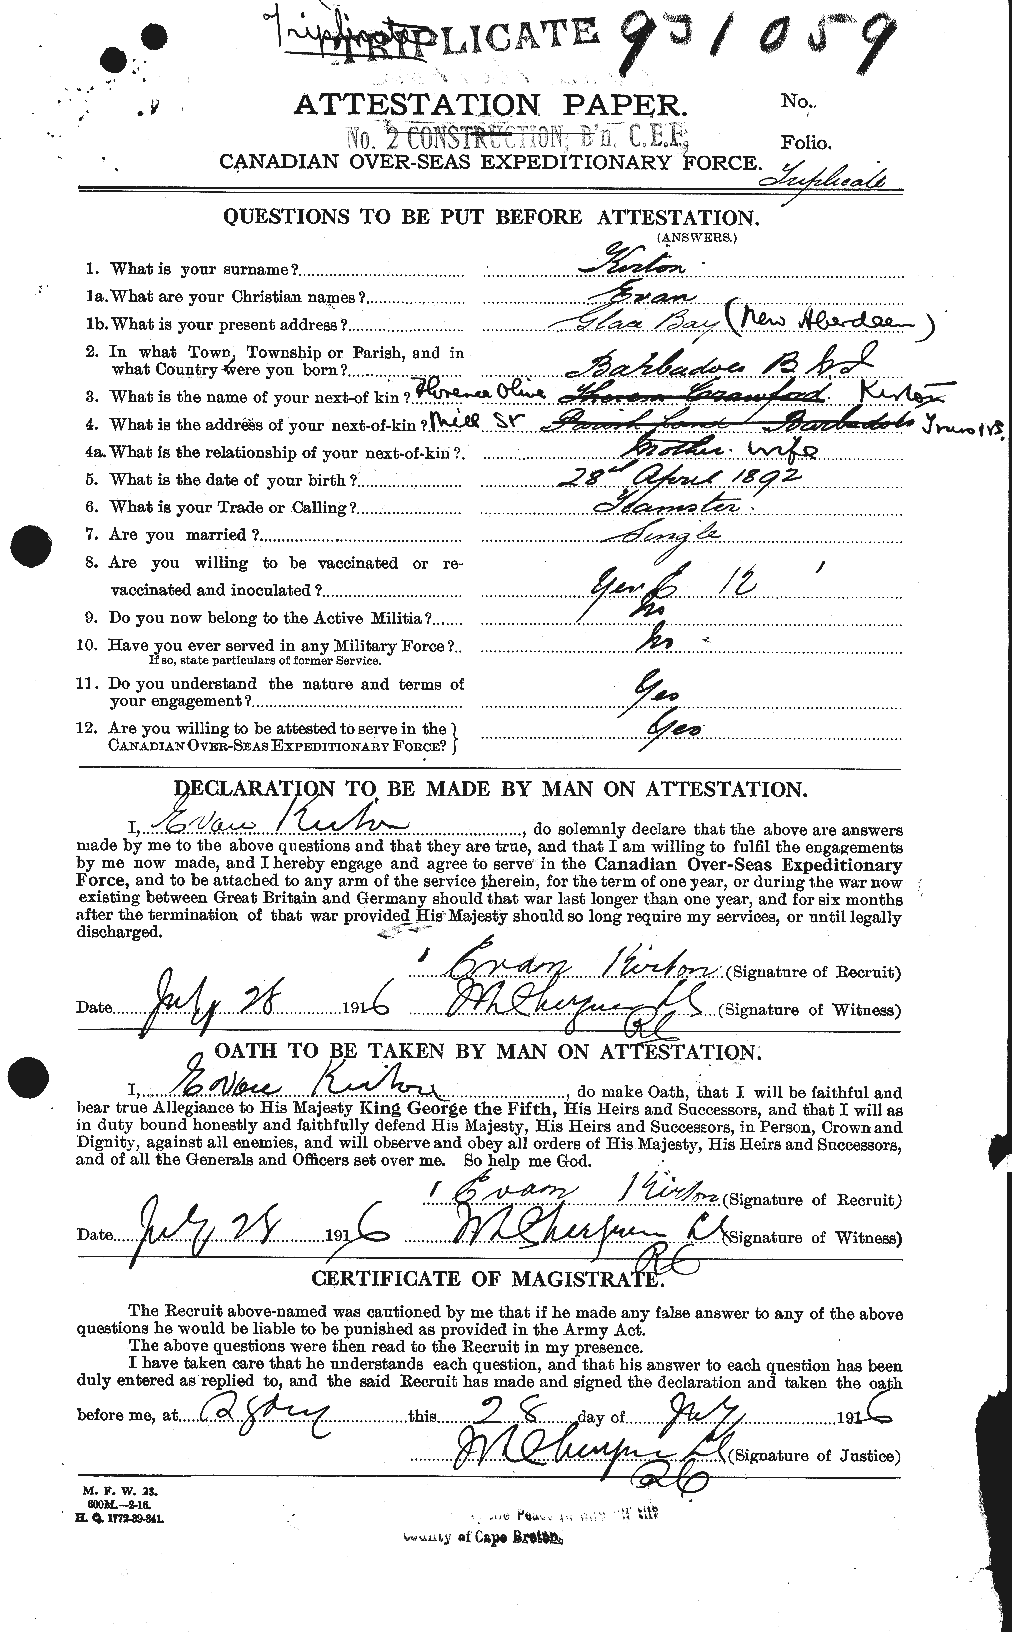 Personnel Records of the First World War - CEF 436274a